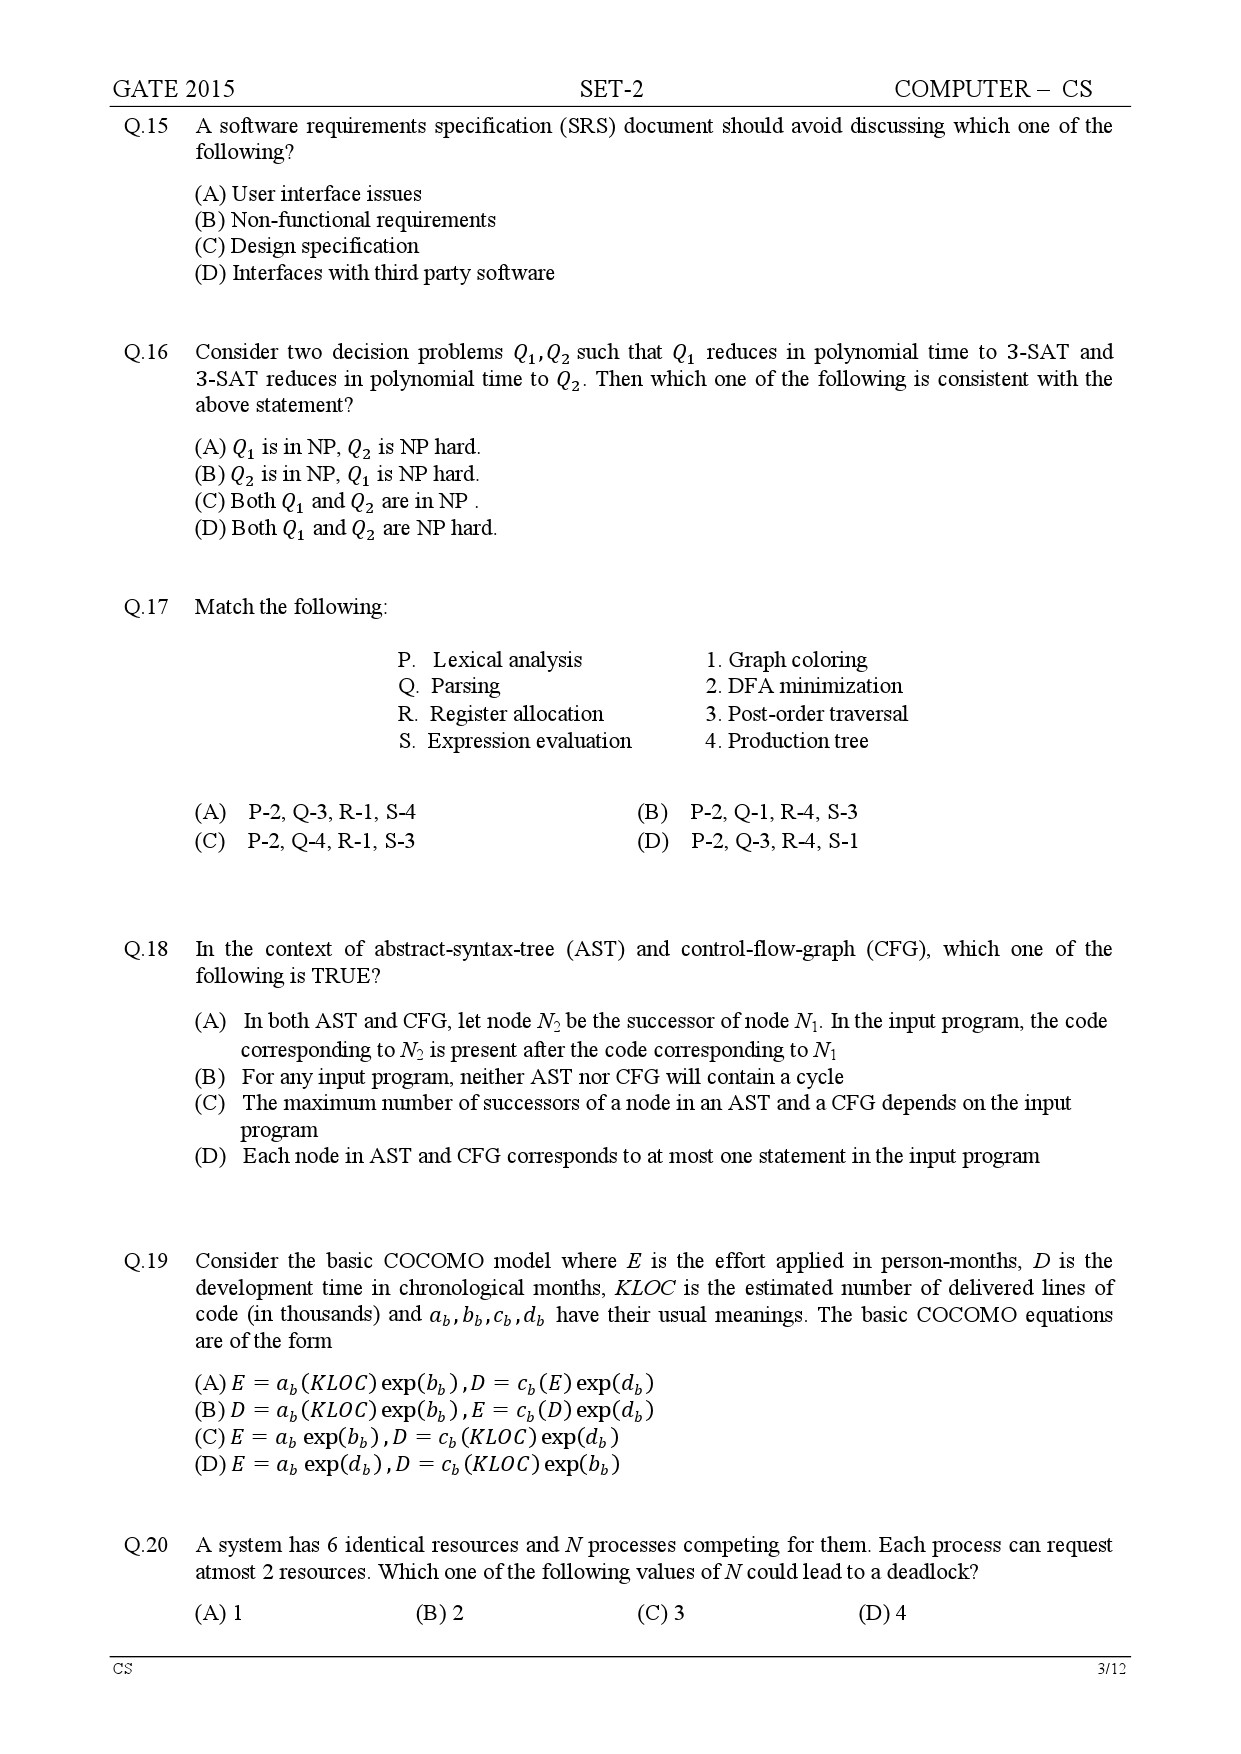 GATE Exam Question Paper 2015 Computer Science and Information Technology Set 2 3